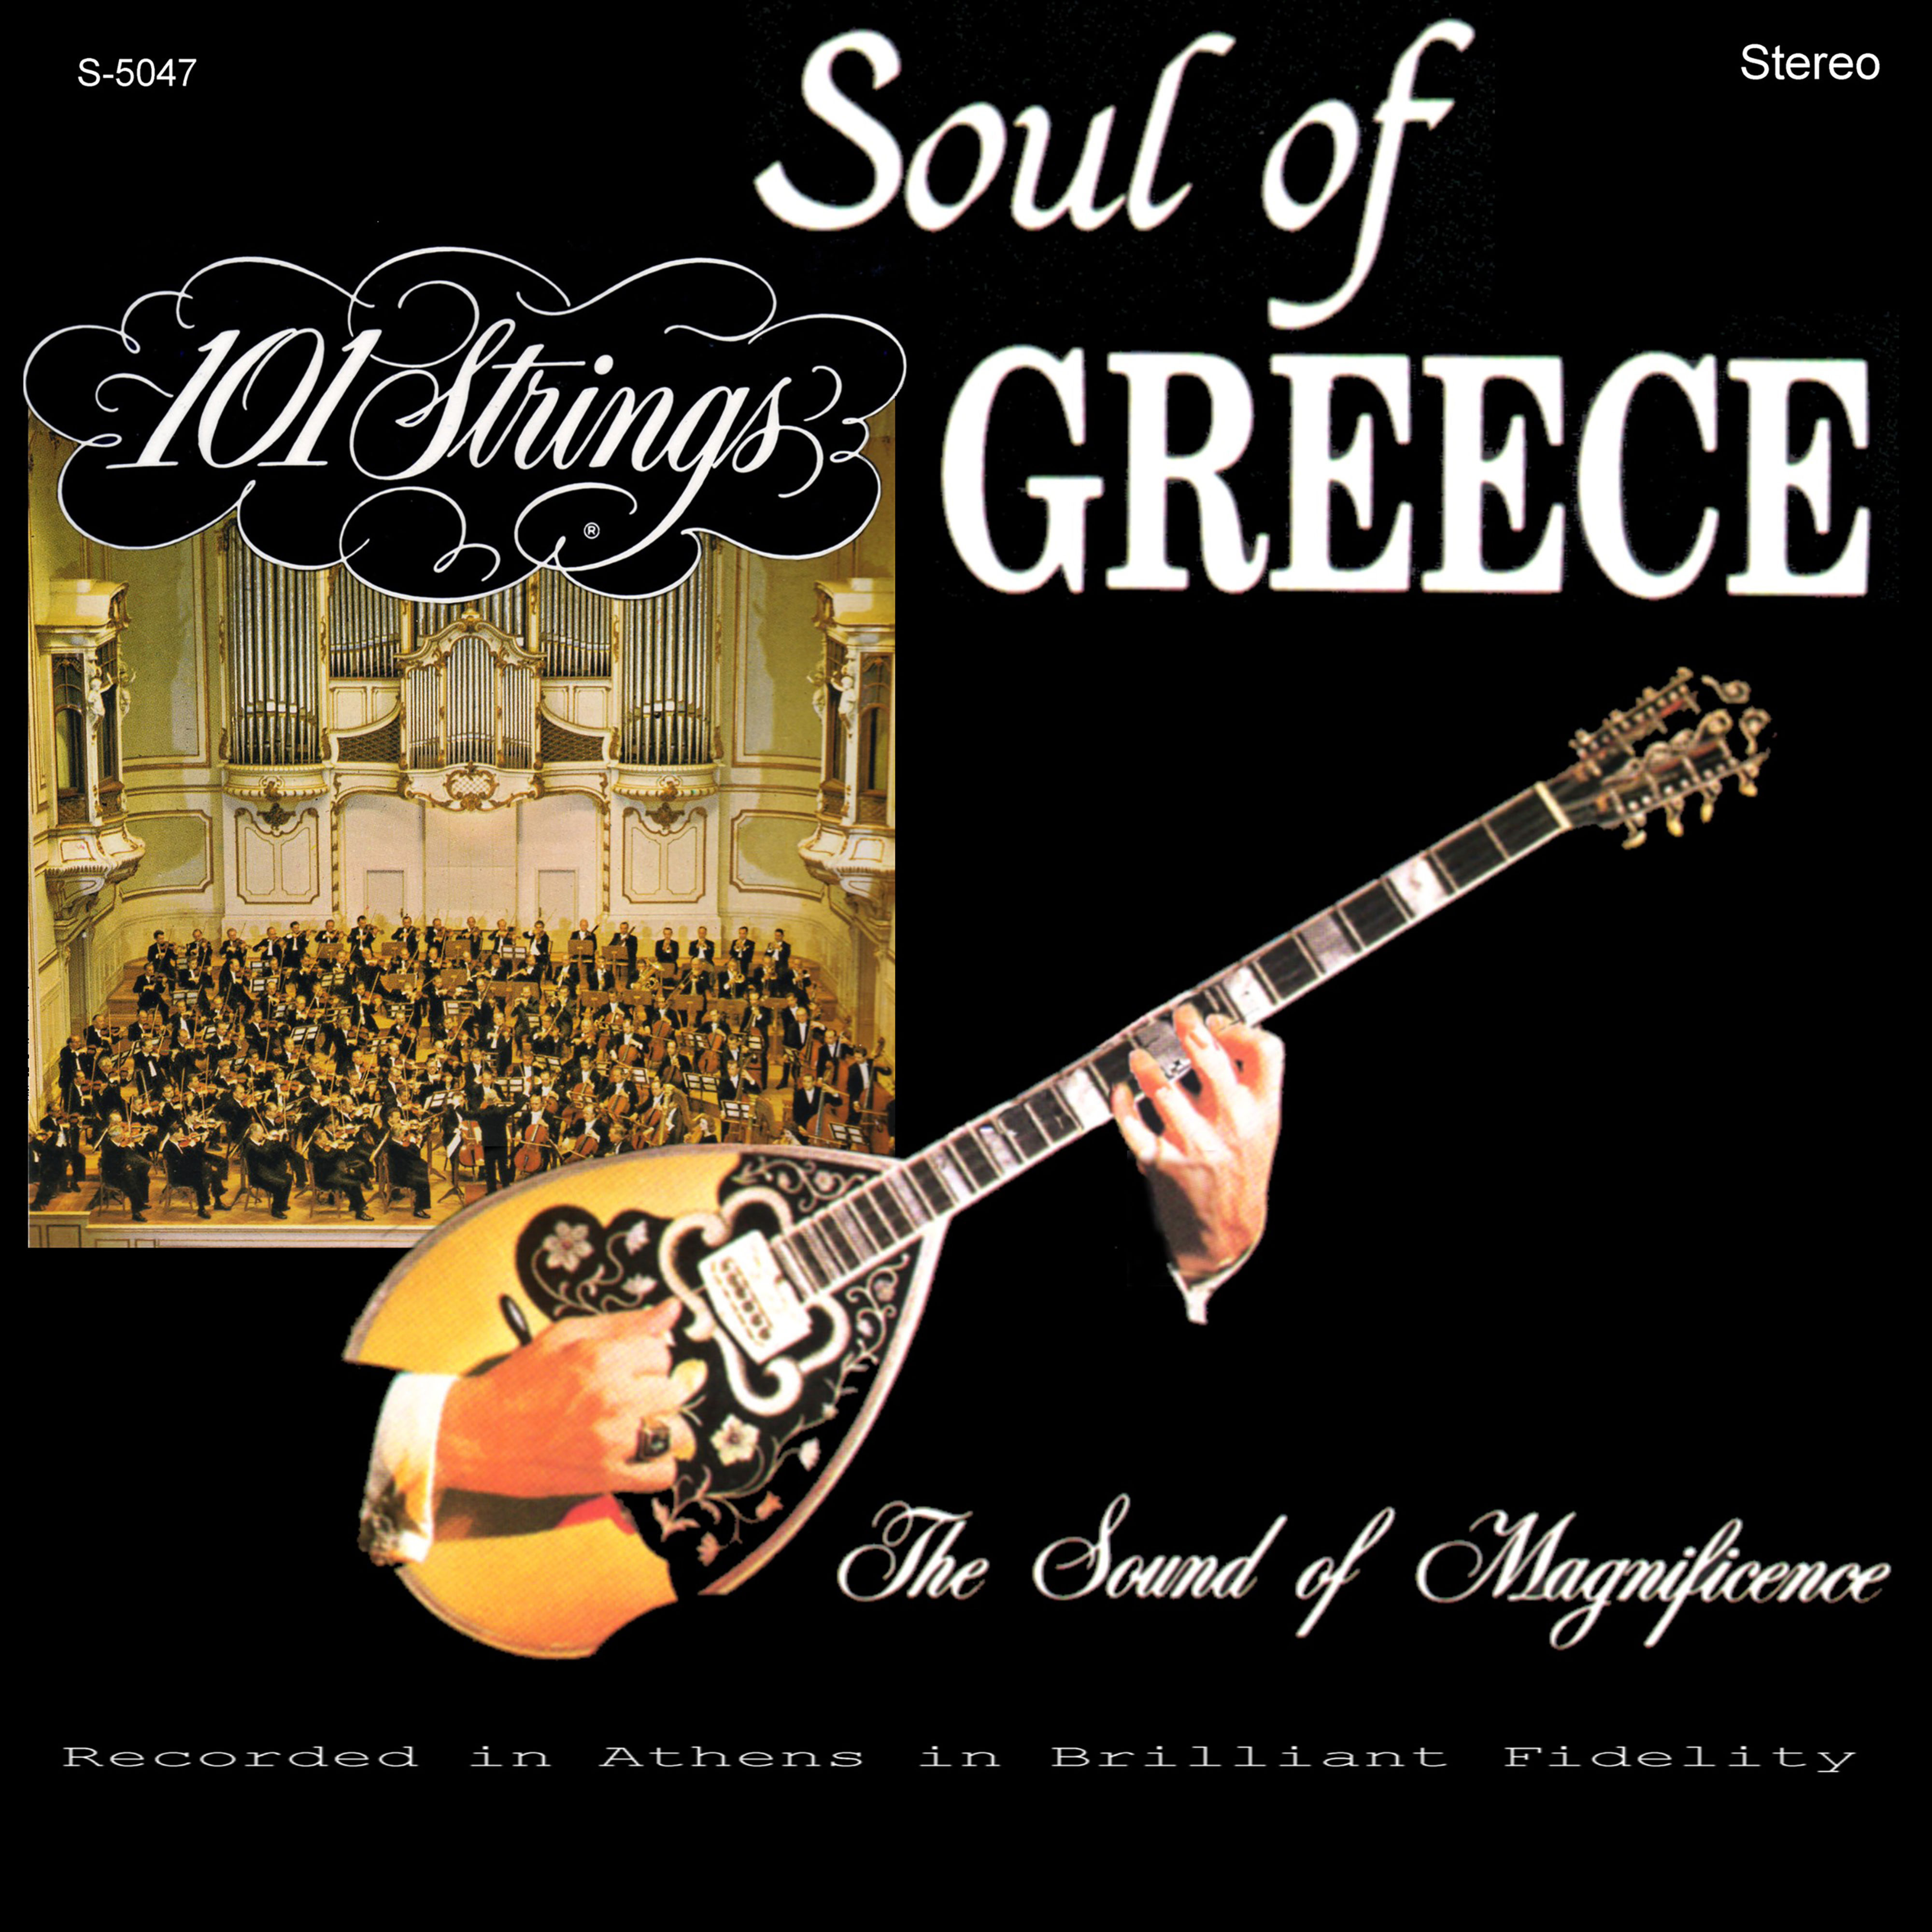 101 Strings Orchestra – The Soul of Greece (1966/2019) [FLAC 24bit/96kHz]